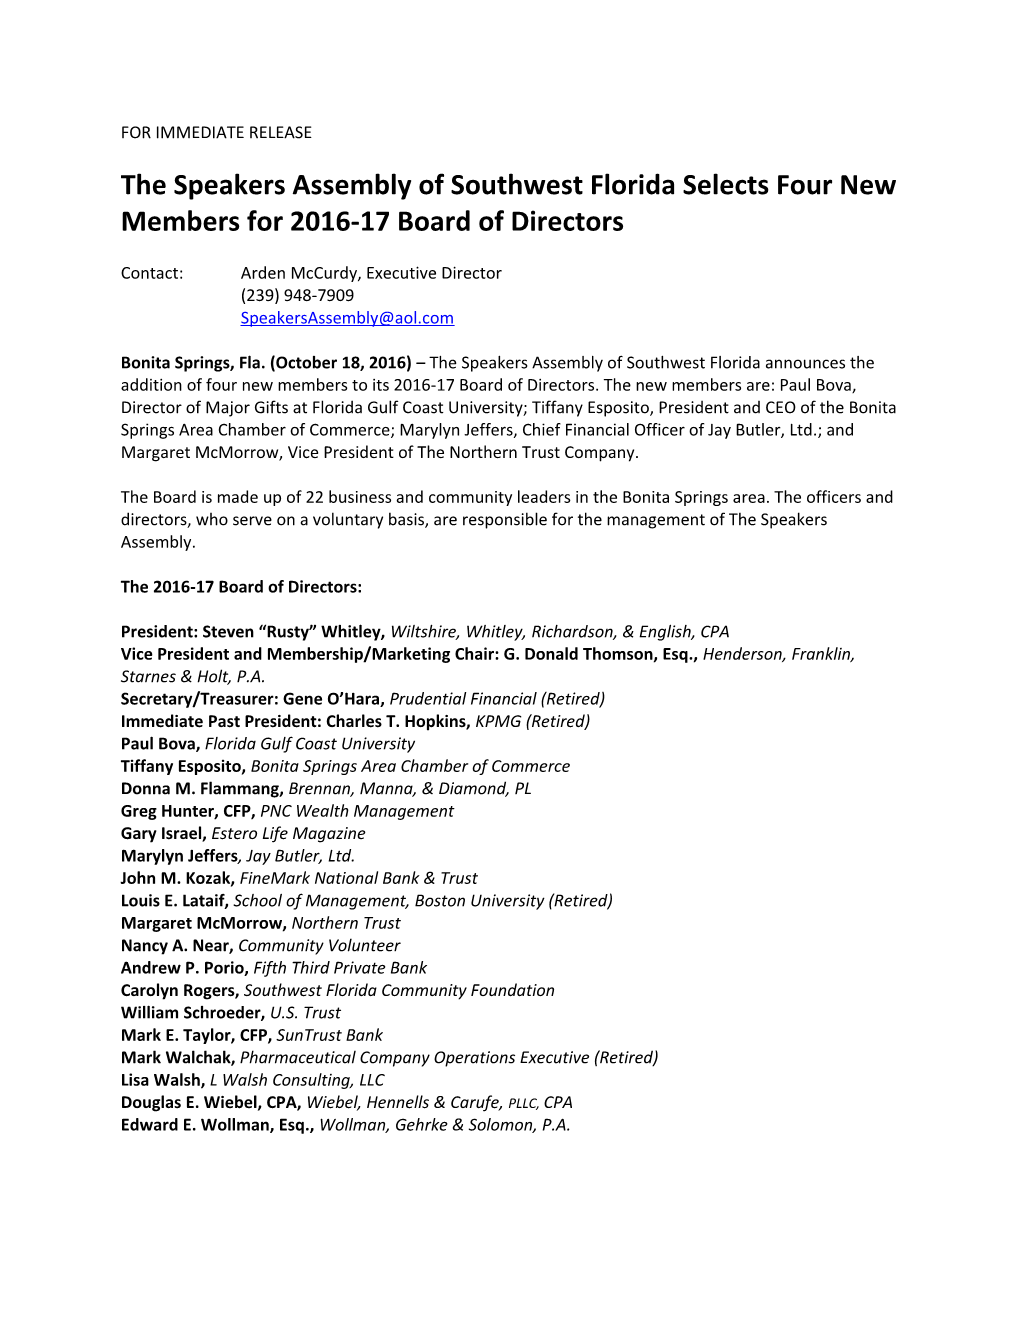 The Speakers Assembly of Southwest Florida Selects Four New Members for 2016-17 Board